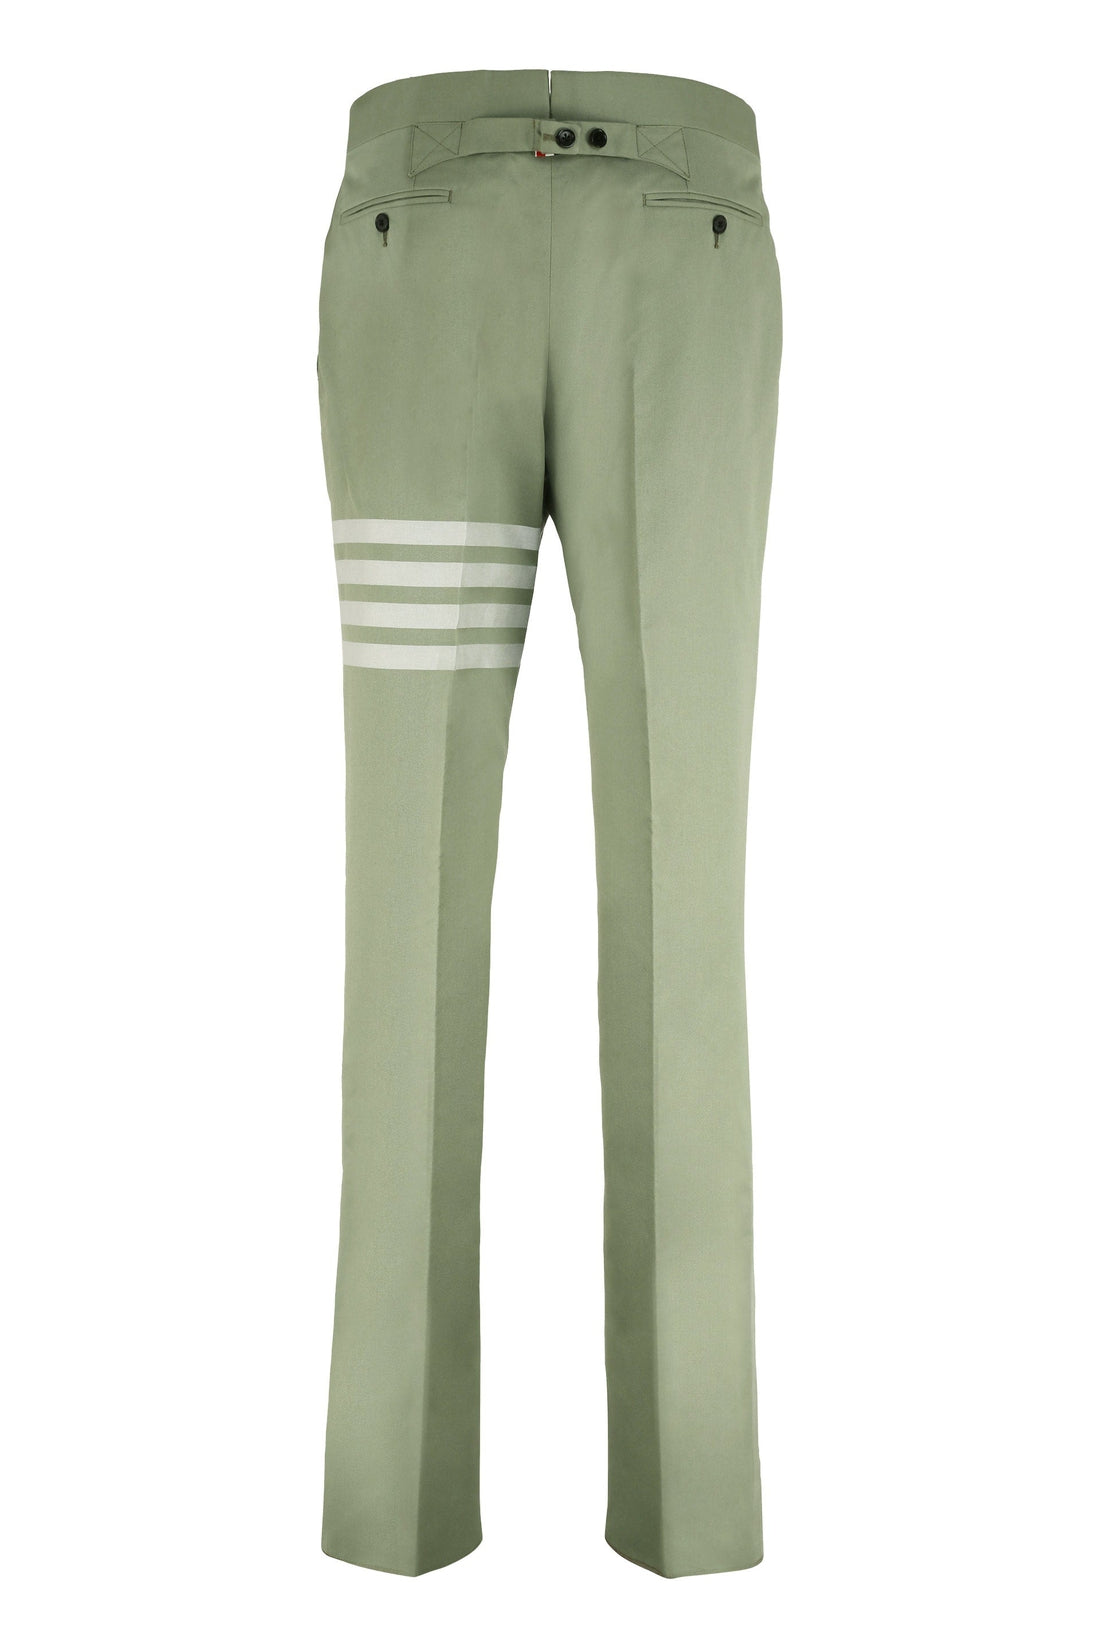 Thom Browne-OUTLET-SALE-Cotton chino trousers-ARCHIVIST